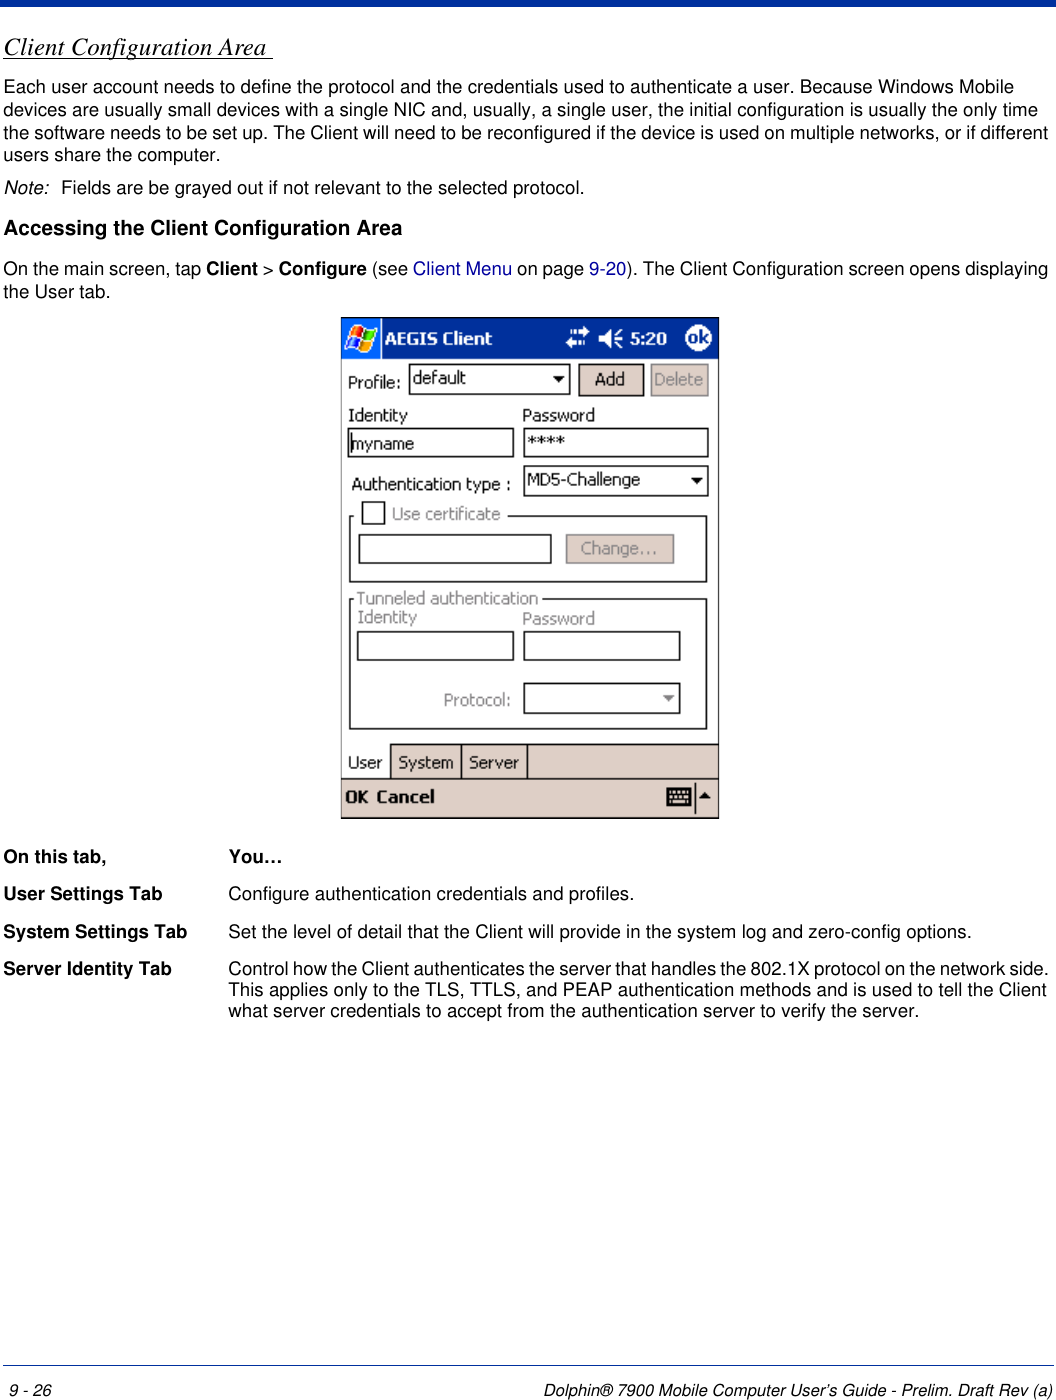 9 - 26 Dolphin® 7900 Mobile Computer User’s Guide - Prelim. Draft Rev (a)Client Configuration Area Each user account needs to define the protocol and the credentials used to authenticate a user. Because Windows Mobile devices are usually small devices with a single NIC and, usually, a single user, the initial configuration is usually the only time the software needs to be set up. The Client will need to be reconfigured if the device is used on multiple networks, or if different users share the computer. Note: Fields are be grayed out if not relevant to the selected protocol. Accessing the Client Configuration AreaOn the main screen, tap Client &gt; Configure (see Client Menu on page 9-20). The Client Configuration screen opens displaying the User tab.On this tab, You…User Settings Tab Configure authentication credentials and profiles.System Settings Tab  Set the level of detail that the Client will provide in the system log and zero-config options.Server Identity Tab  Control how the Client authenticates the server that handles the 802.1X protocol on the network side. This applies only to the TLS, TTLS, and PEAP authentication methods and is used to tell the Client what server credentials to accept from the authentication server to verify the server.